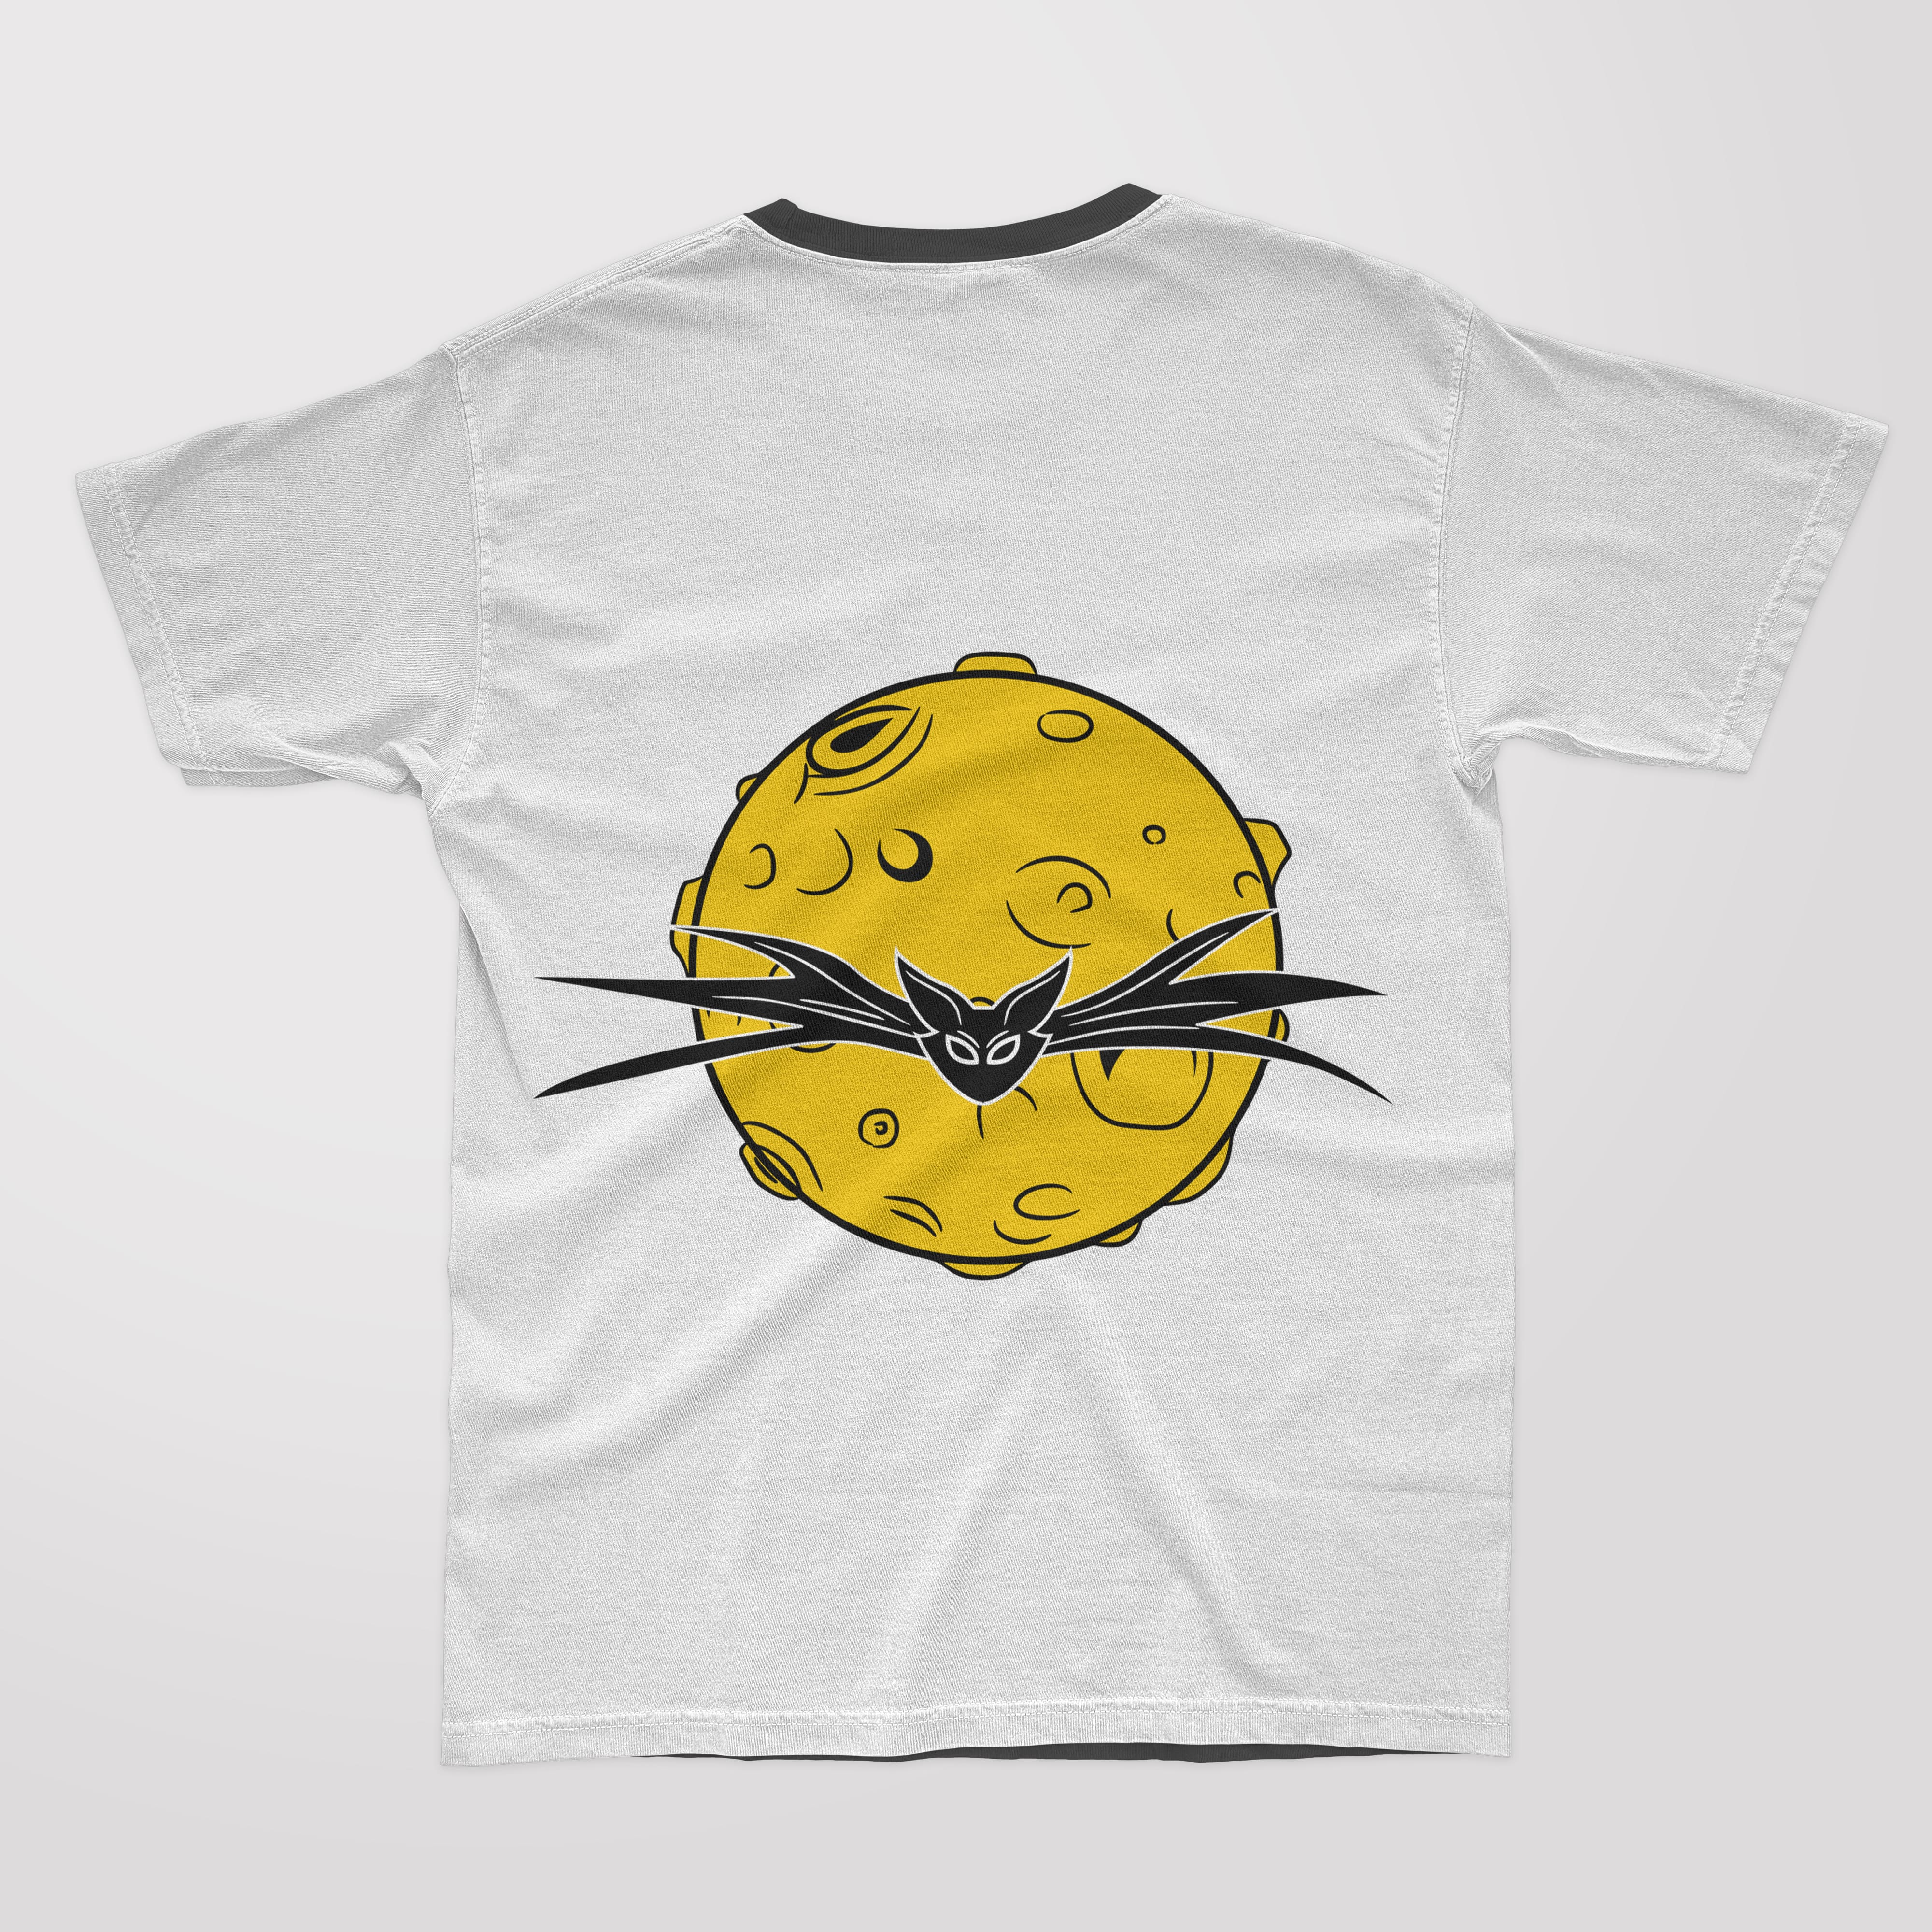 Moon and bat on the white t-shirt with black collar on a gray background.